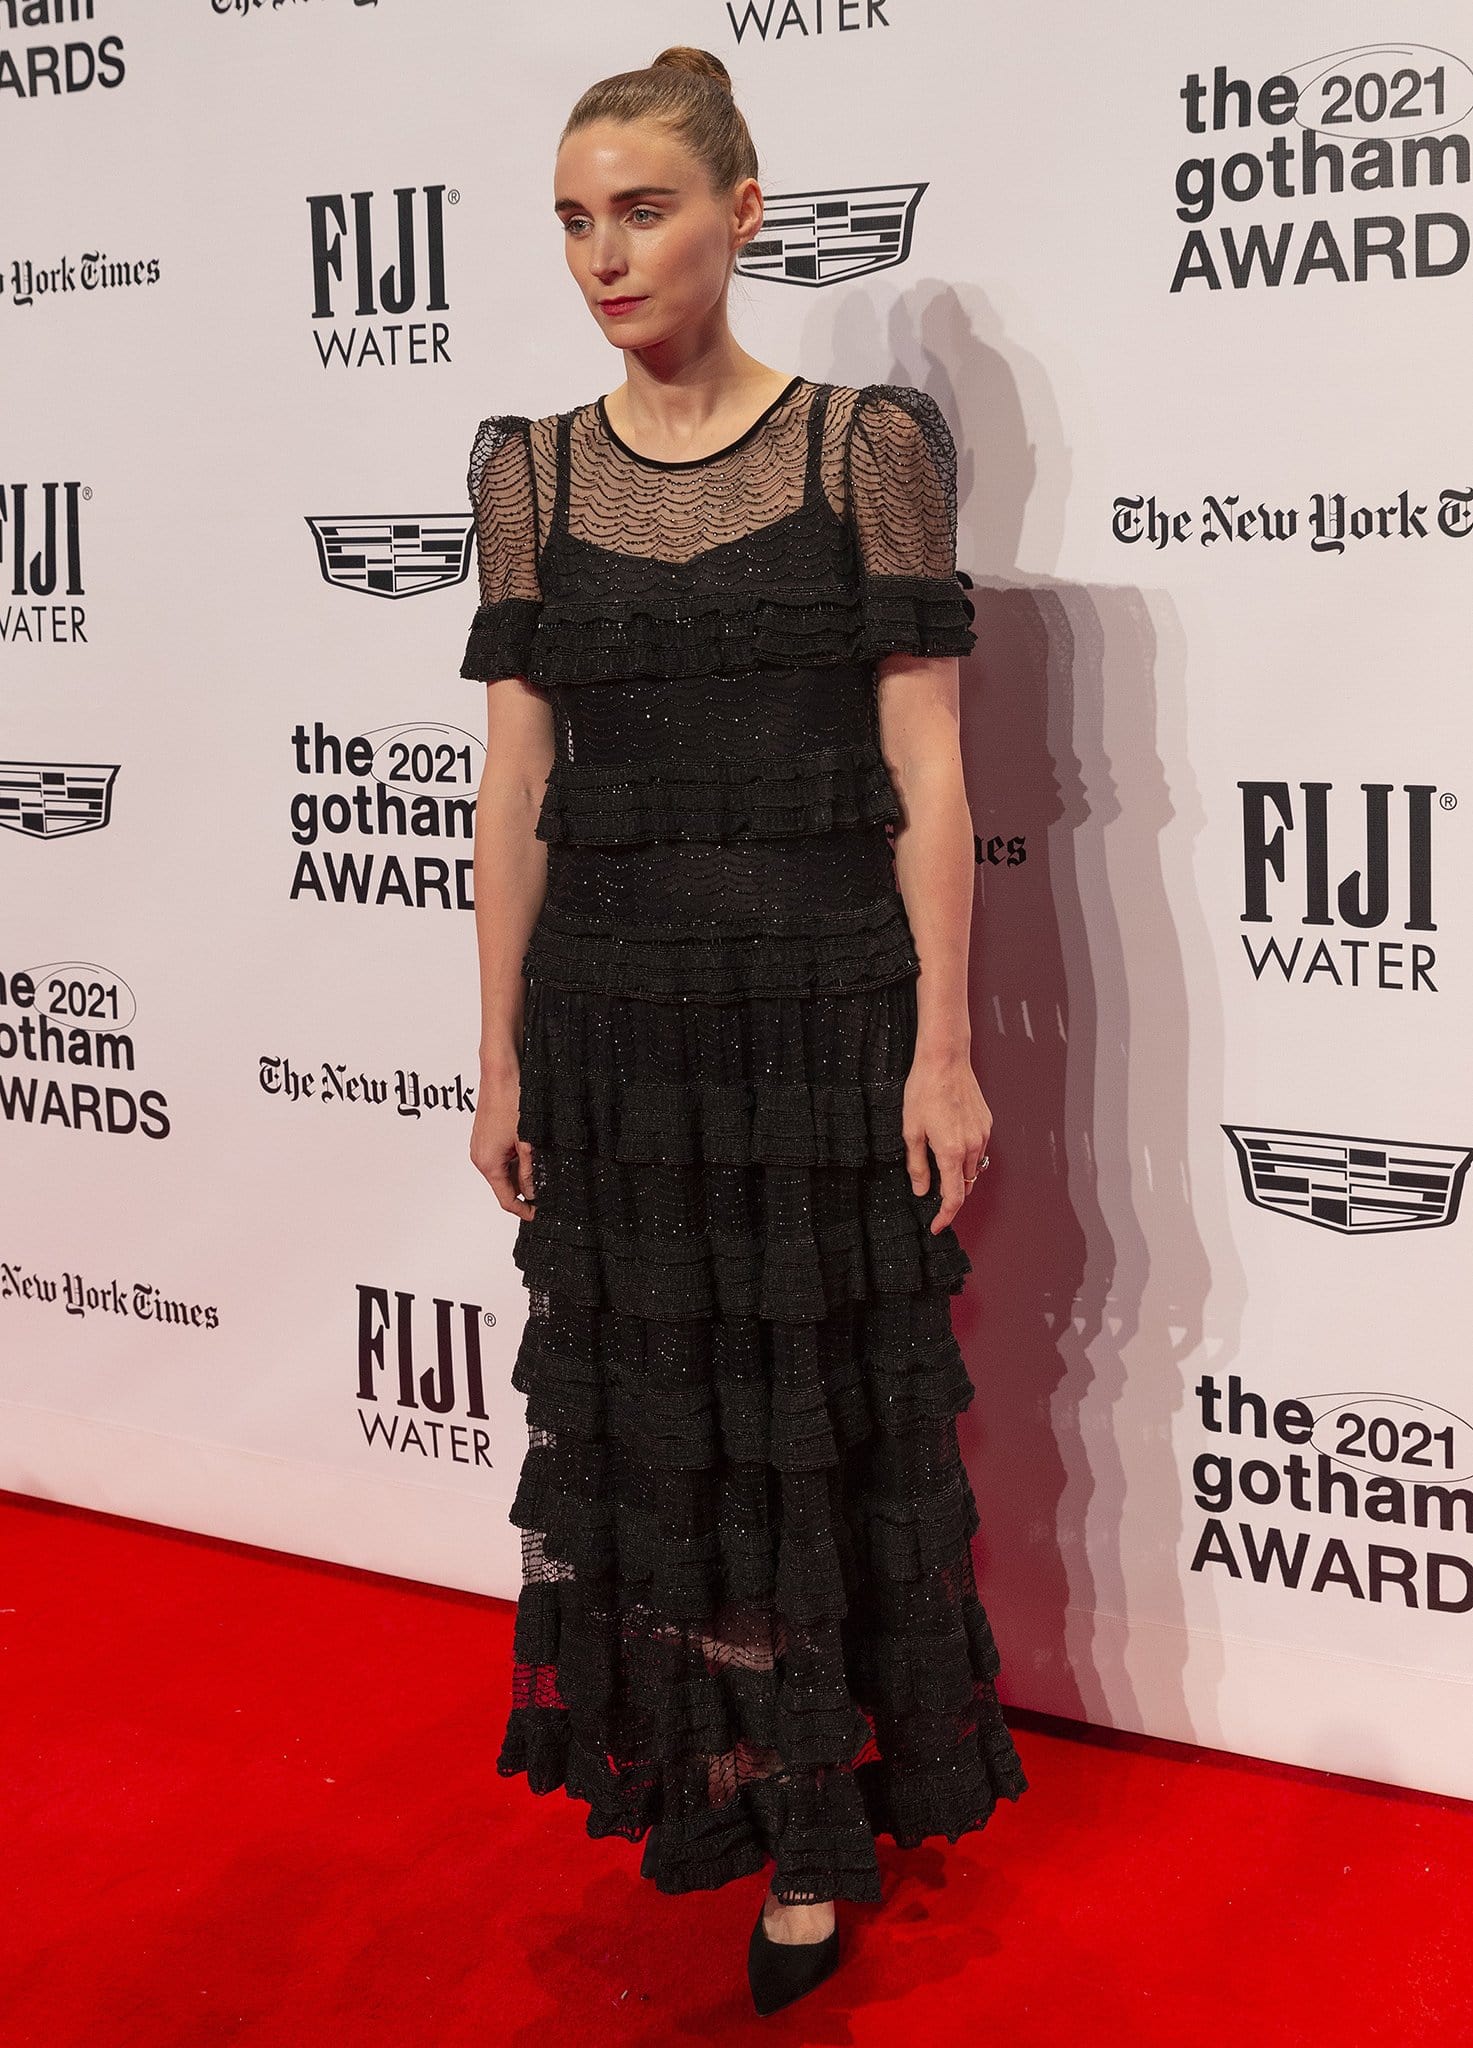 Rooney Mara wears a recycled Givenchy Haute Couture black lace gown